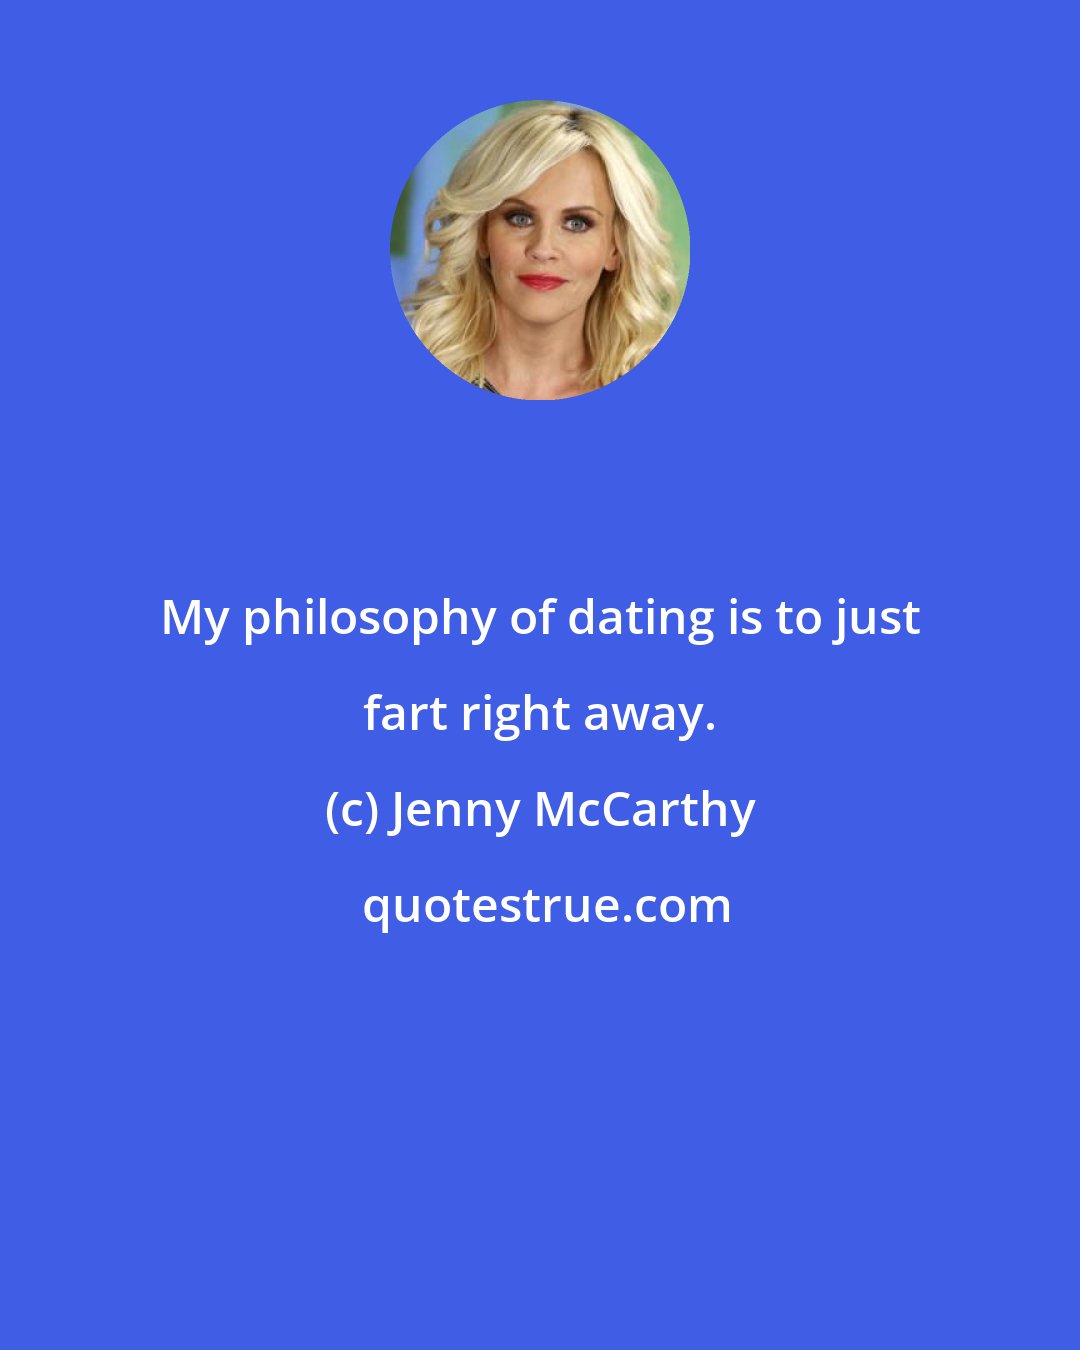 Jenny McCarthy: My philosophy of dating is to just fart right away.